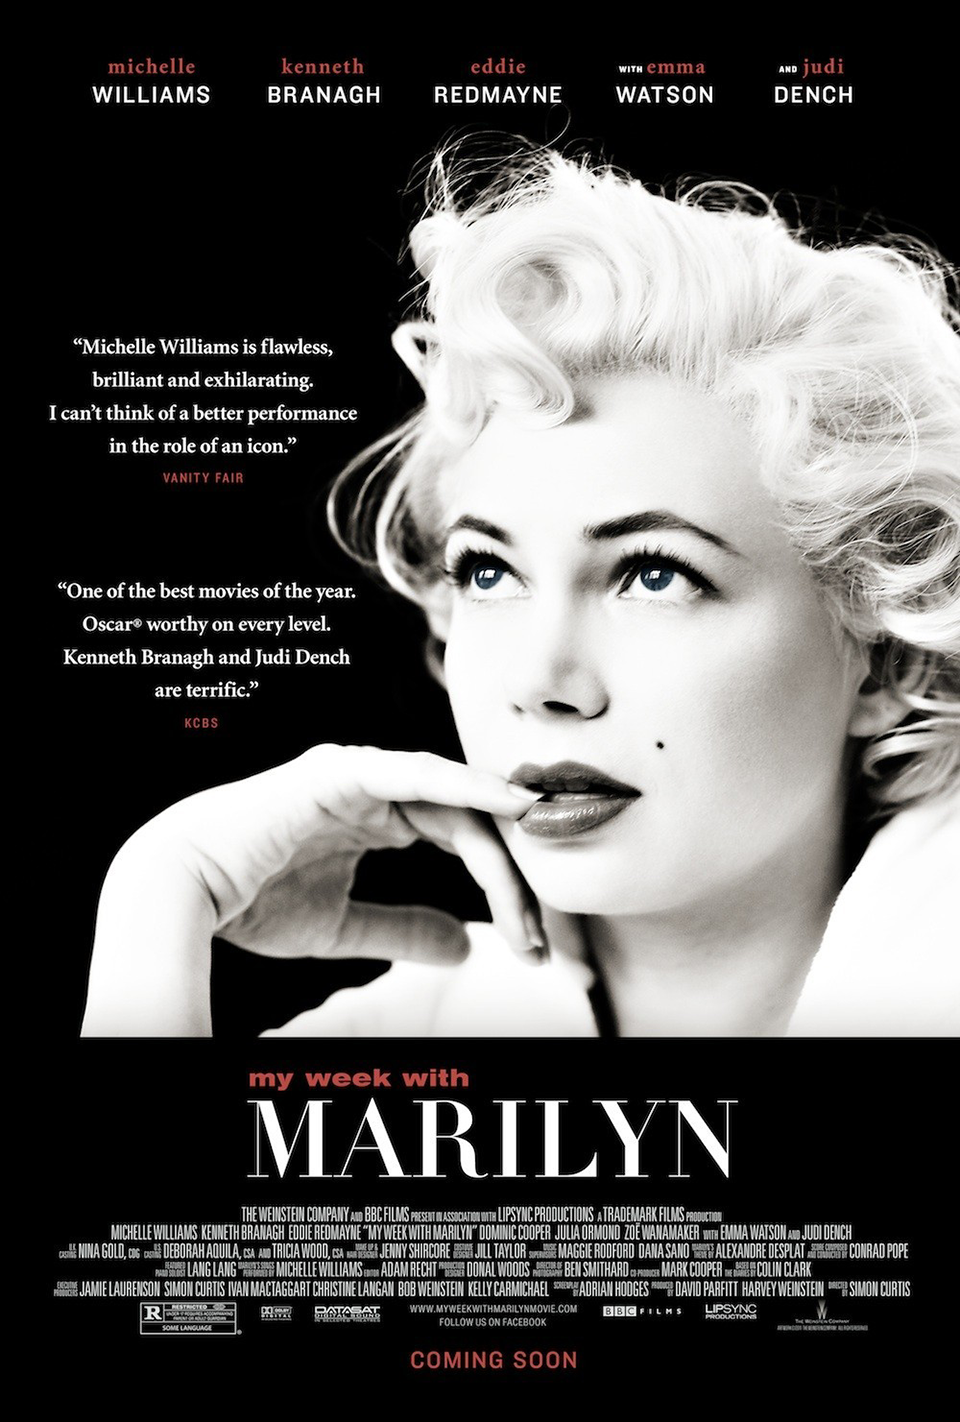 My Week With Marilyn (2011) Feature Film :: Uni-versal Extras